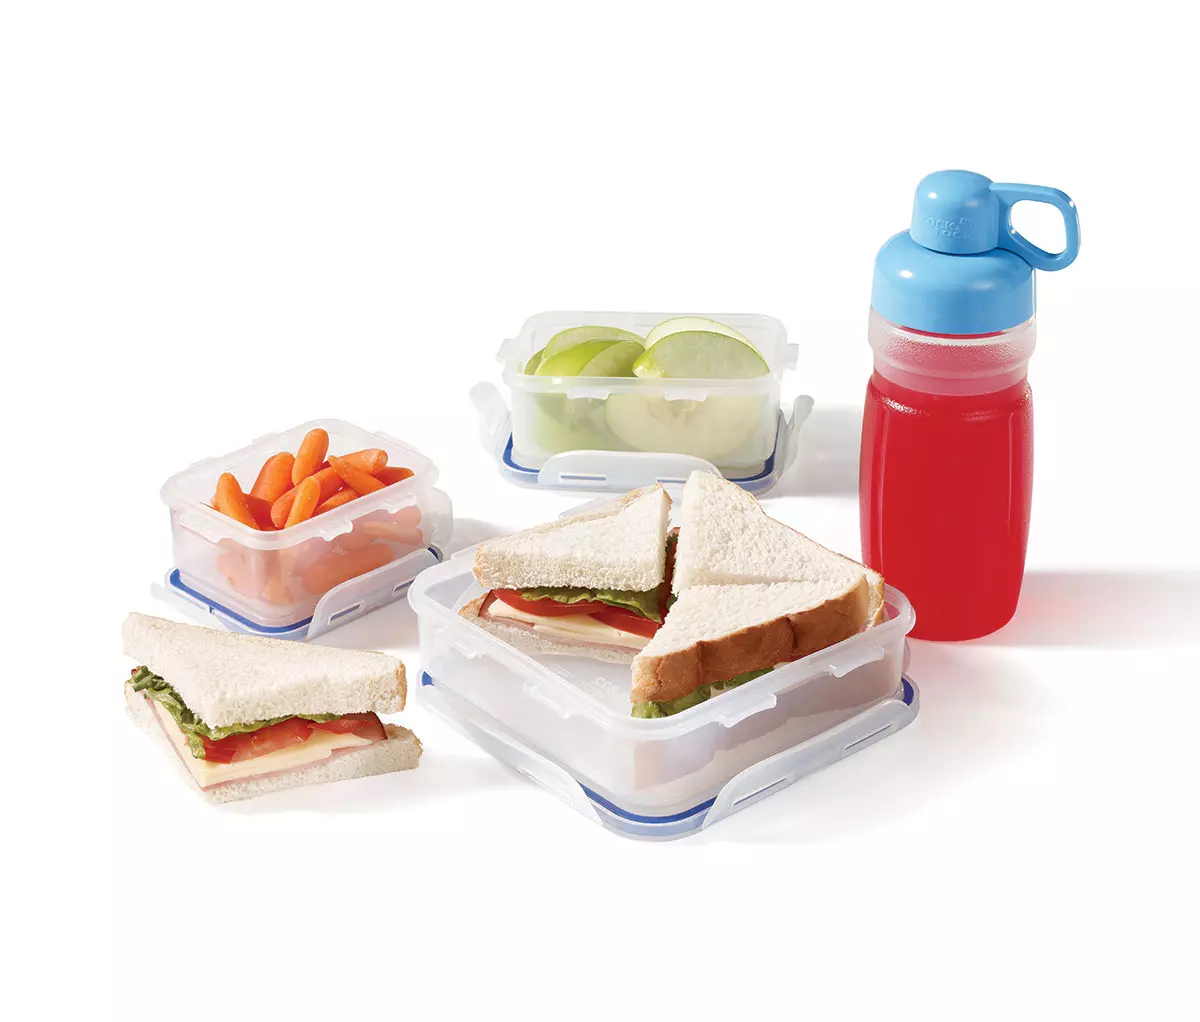 5 Back-to-School Meal Prep Tips